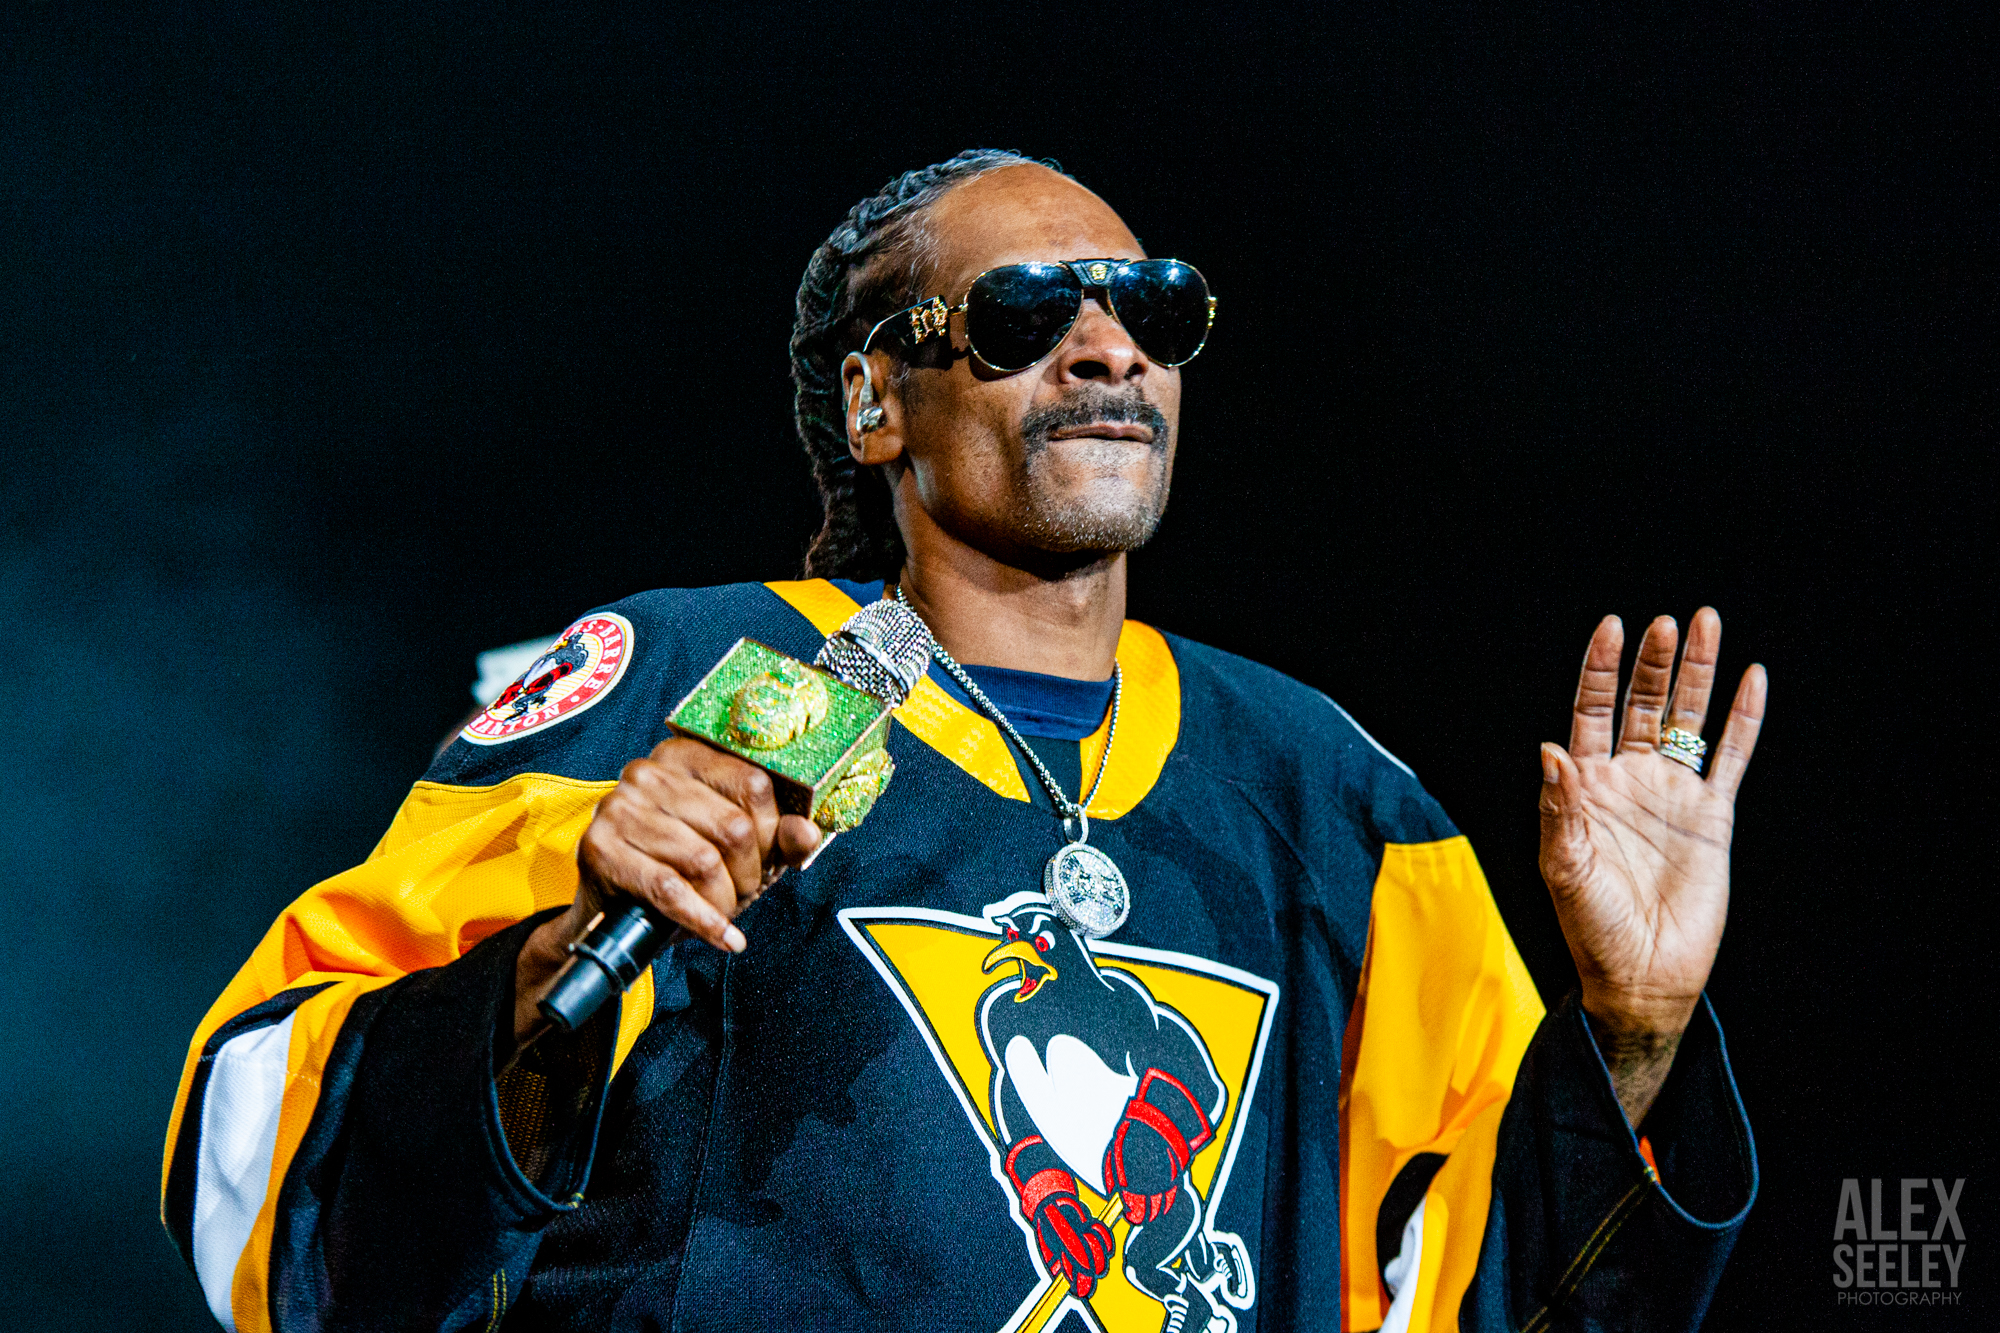 SNOOP DOGG BRINGS 25 YEARS OF DOGGY STYLE TO WILKES-BARRE